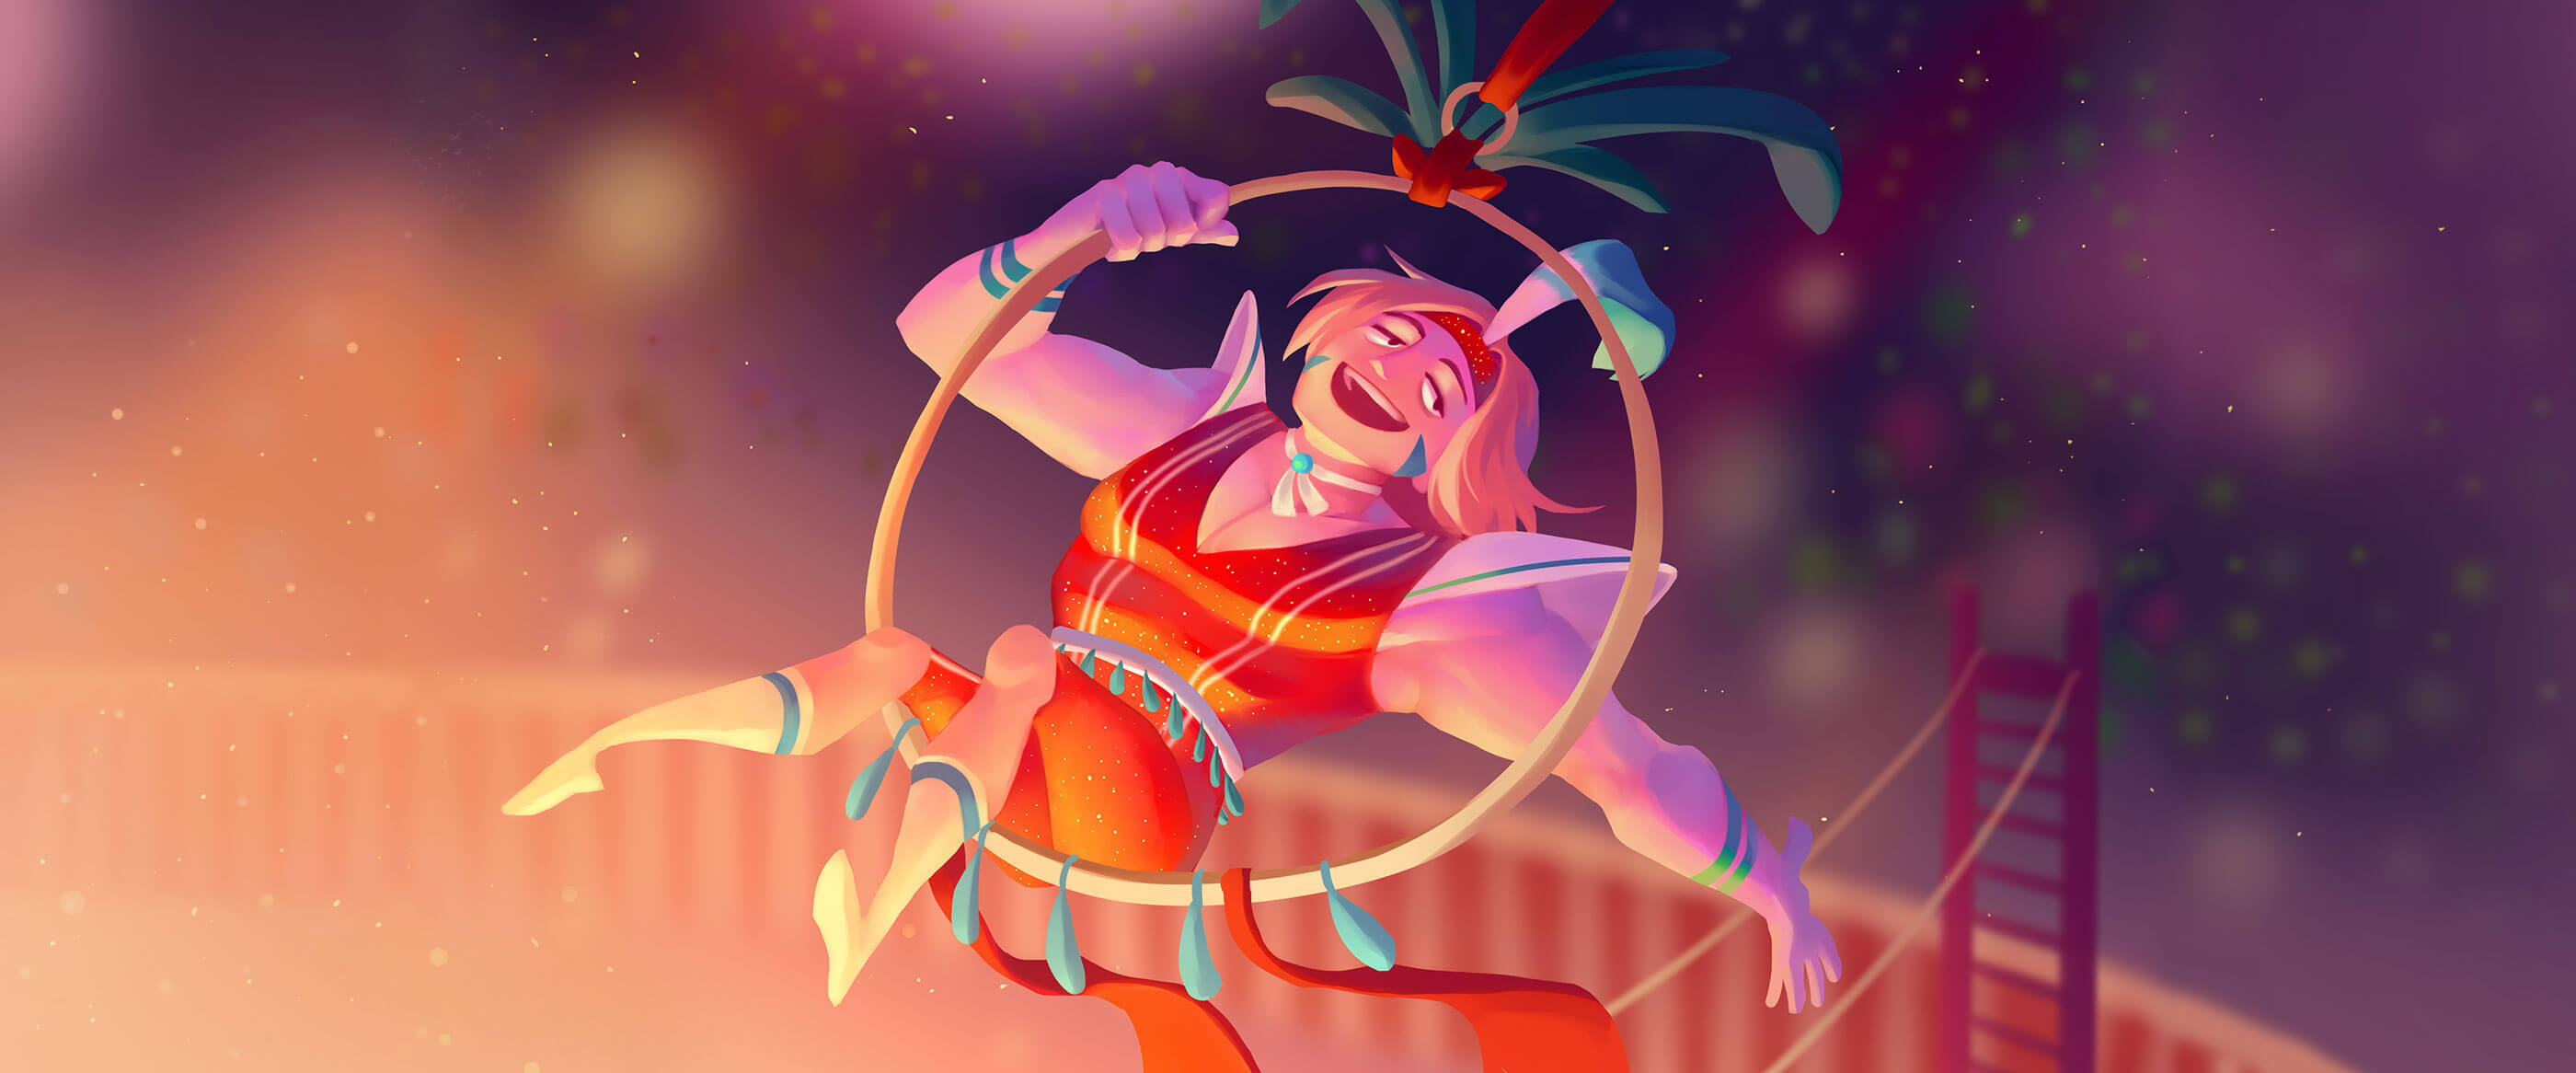 A digital illustration of a trapeze artist in a swing by DigiPen student Ryanna Kim.